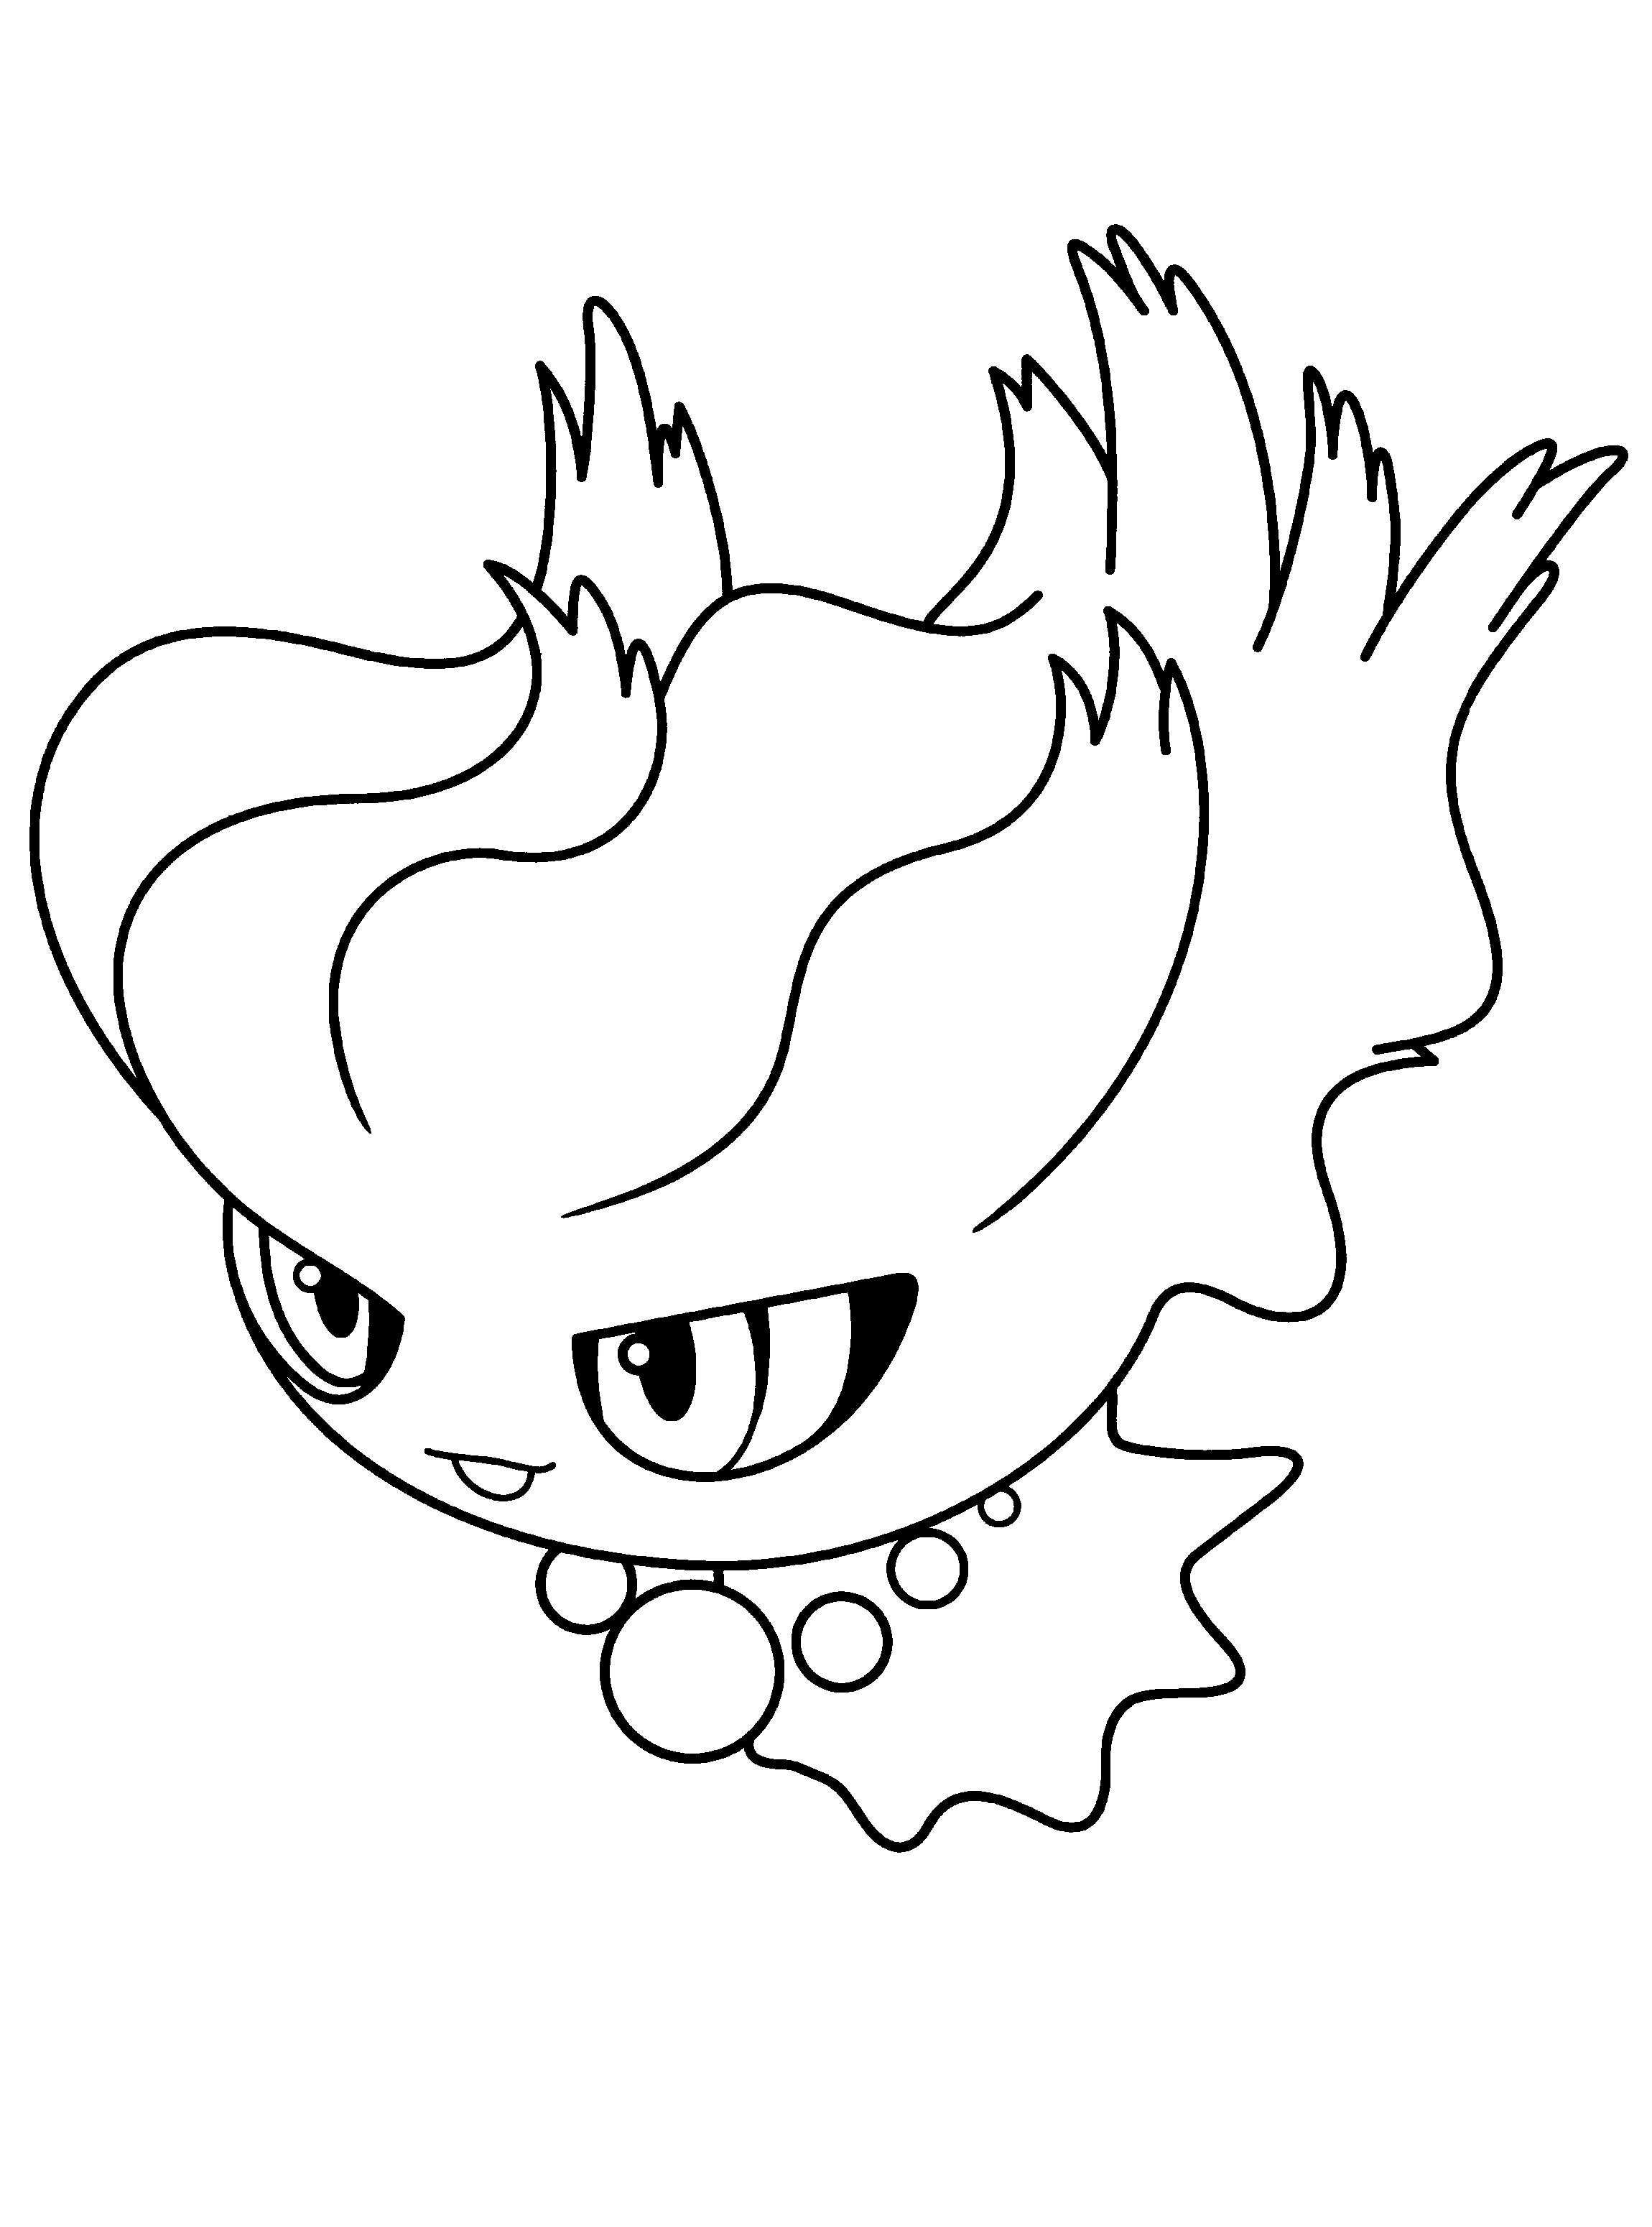 Pokemon Coloring Pages
 Pokemon coloring pages pokemon images and print